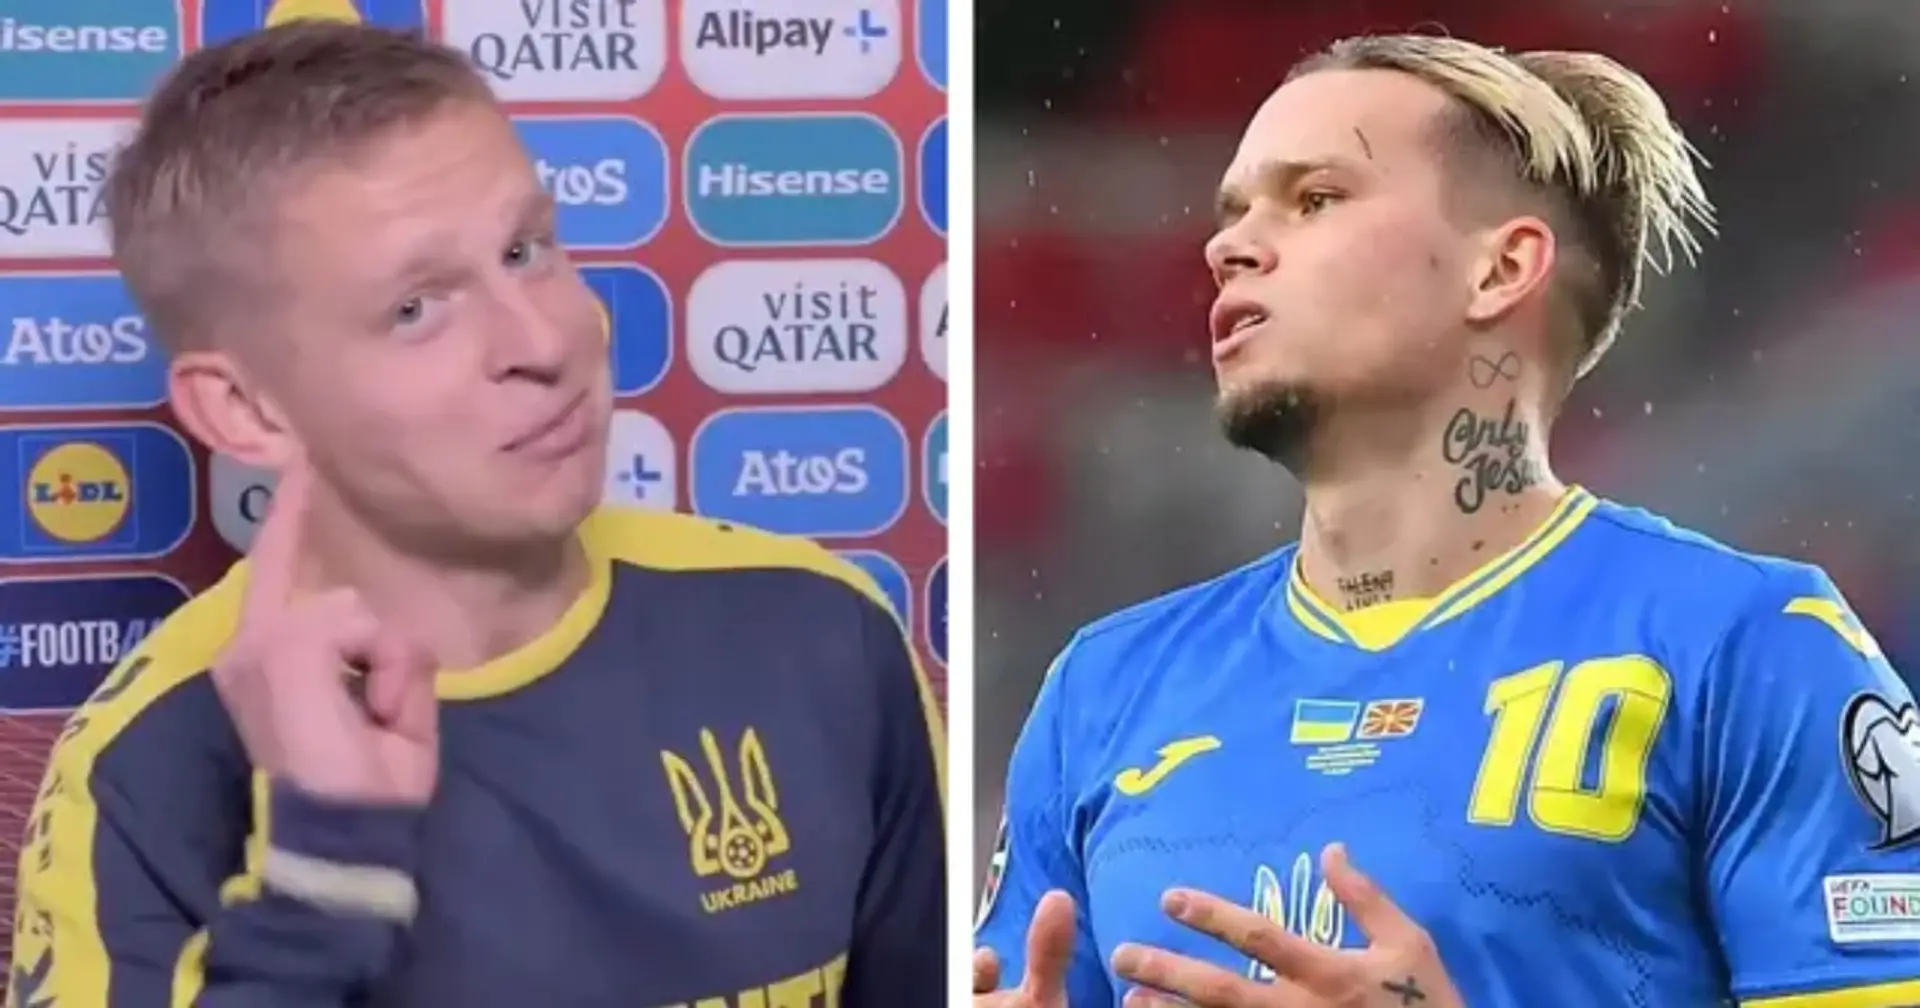 Zinchenko warns Mudryk against scoring vs Arsenal: 'If you do that on Saturday, I’ll rip your balls off'